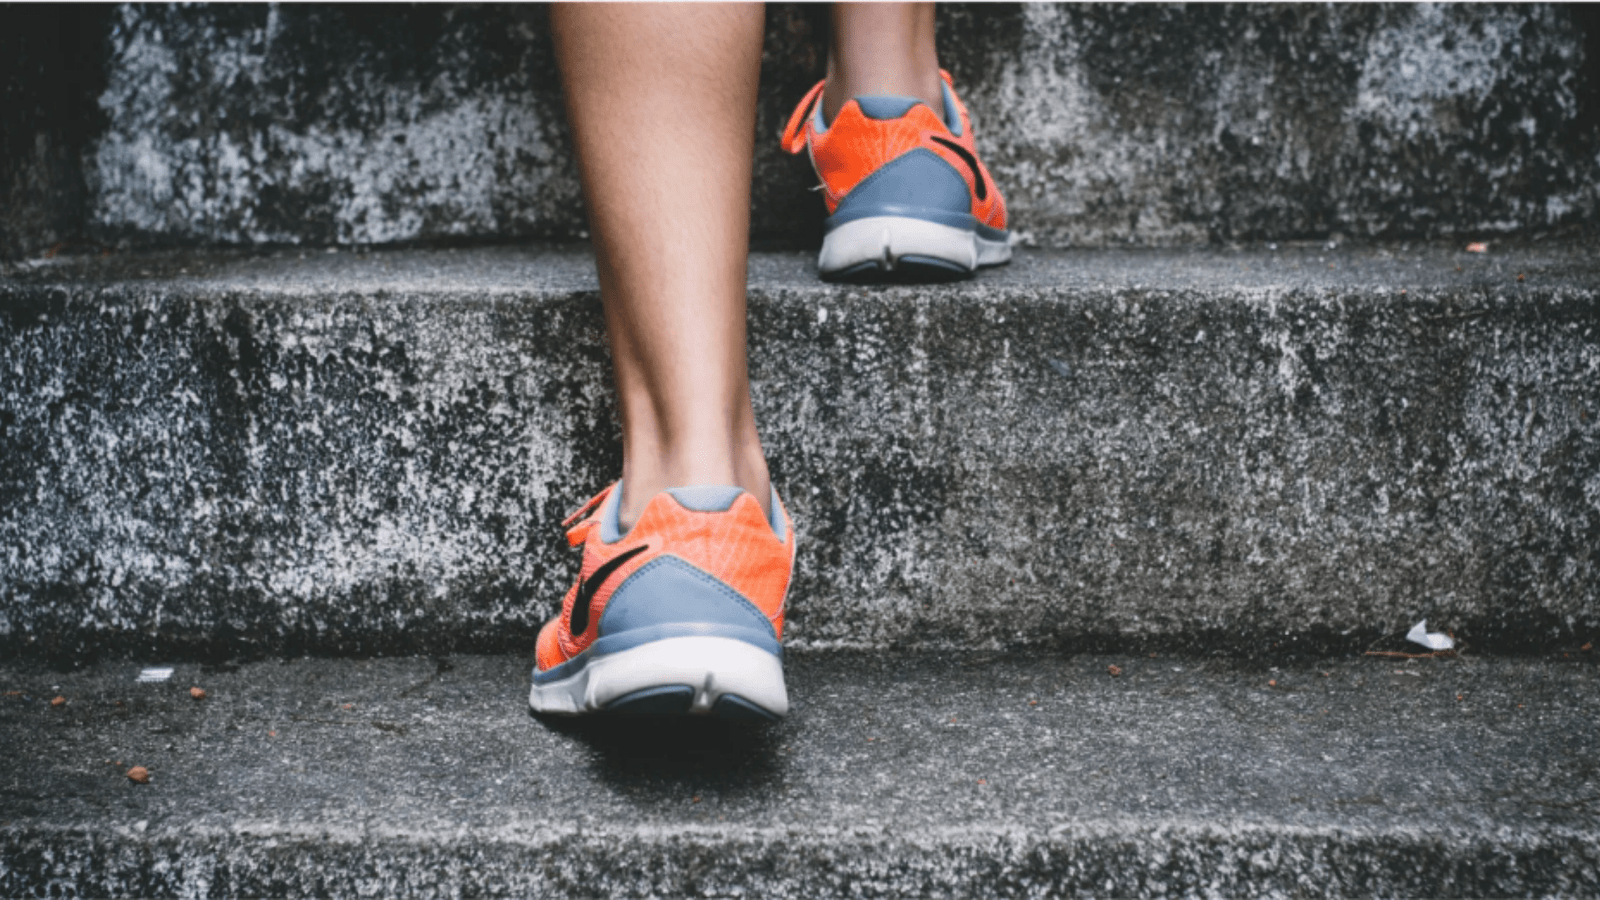 Choosing the Right Runing Shoes to Avoiding Injury